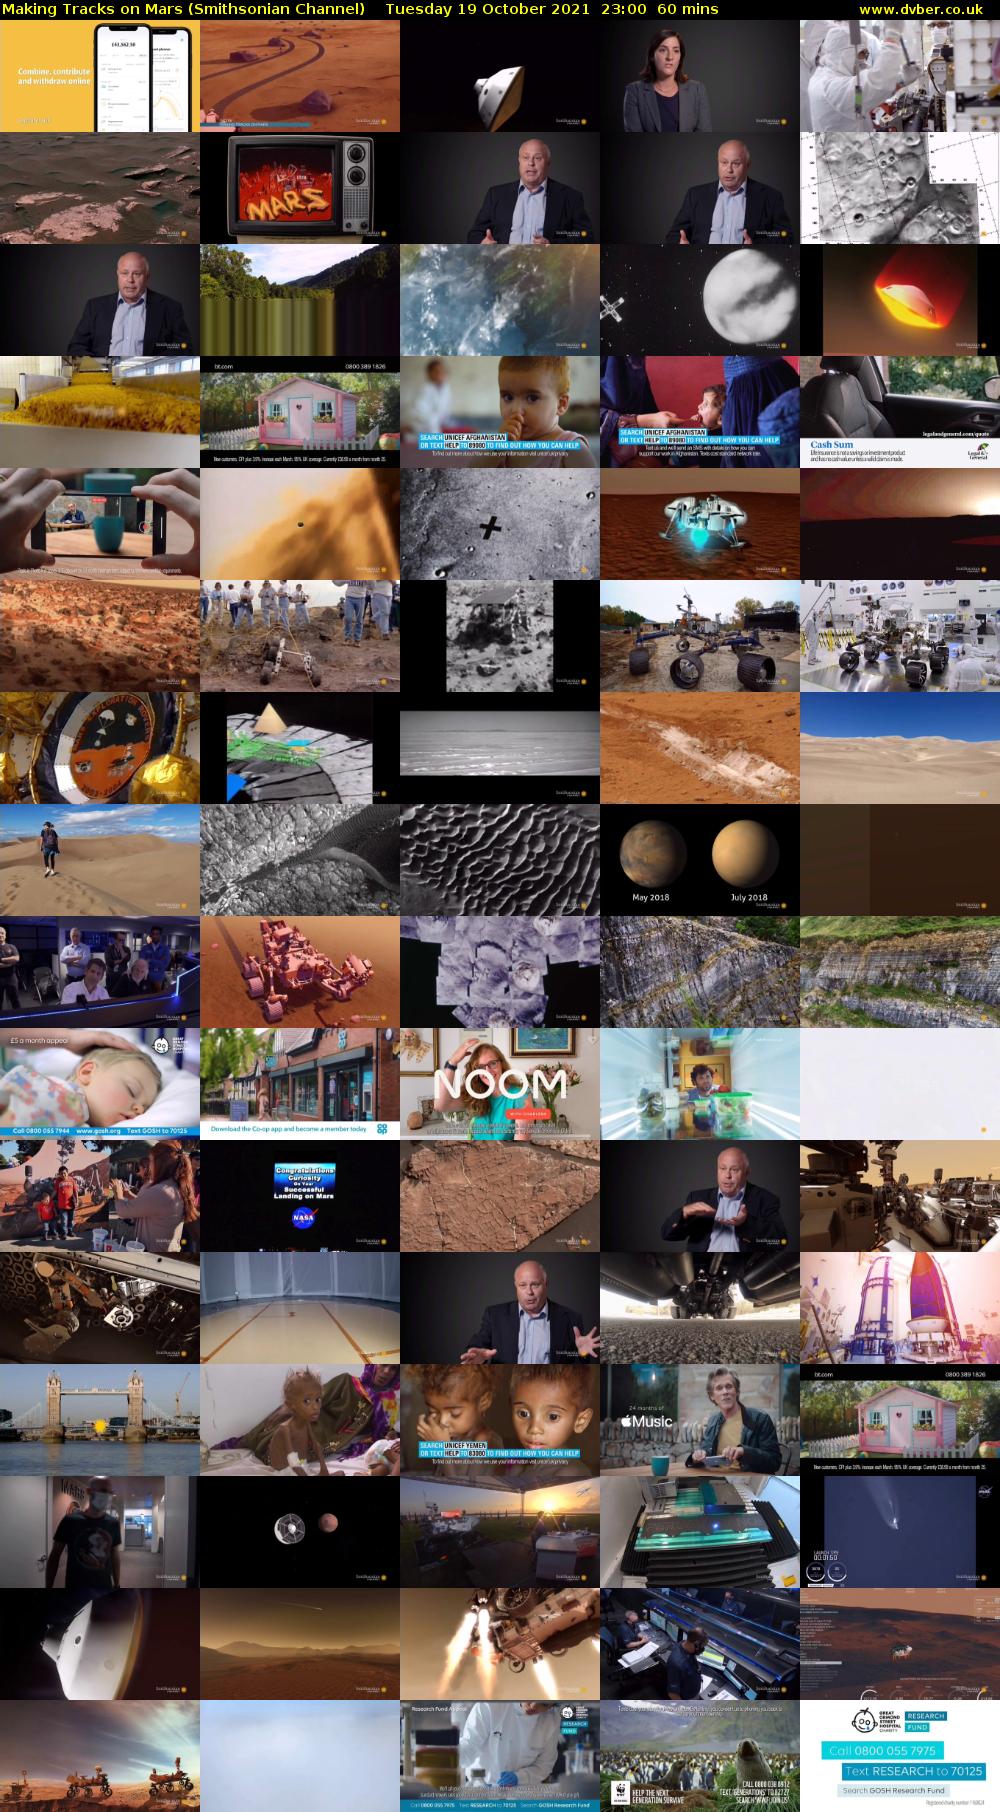 Making Tracks on Mars (Smithsonian Channel) Tuesday 19 October 2021 23:00 - 00:00